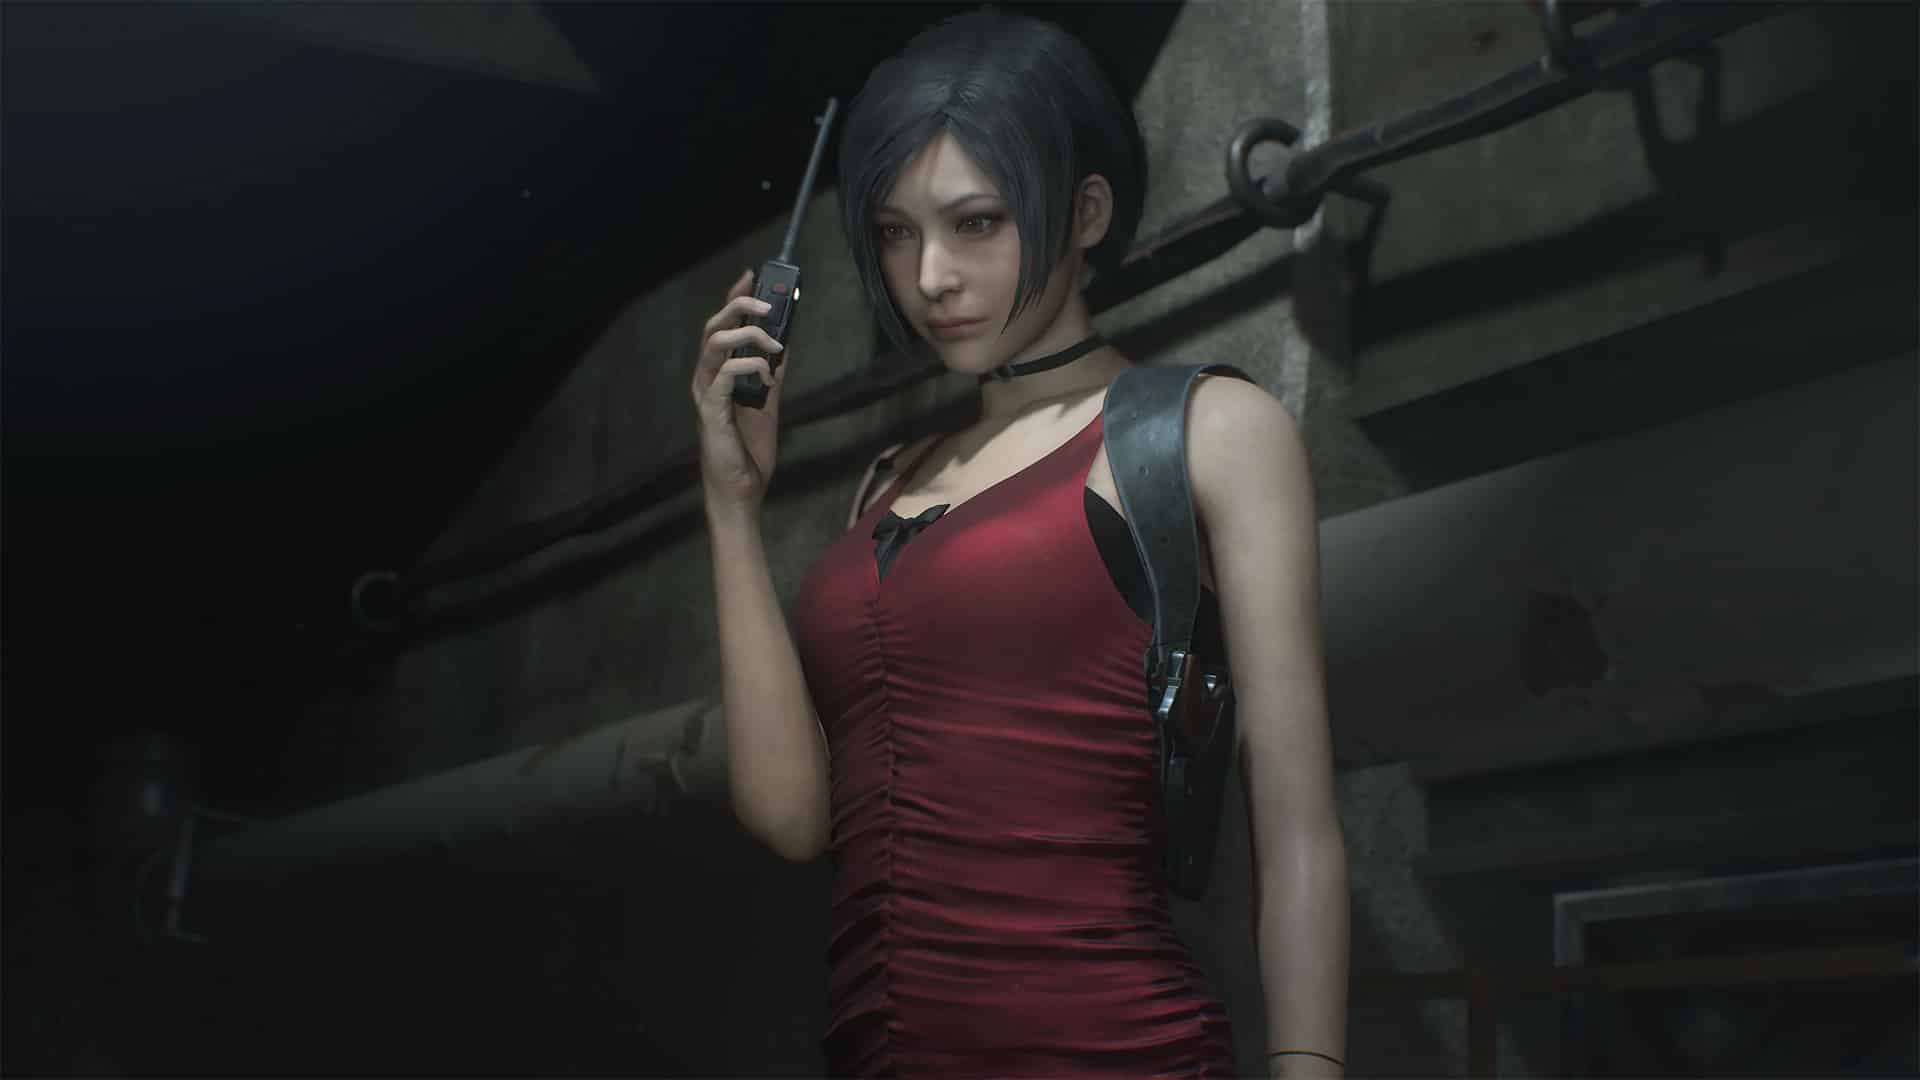 Resident Evil 8 Rumors: How the Series Feels Like the DC Extended Universe of Games